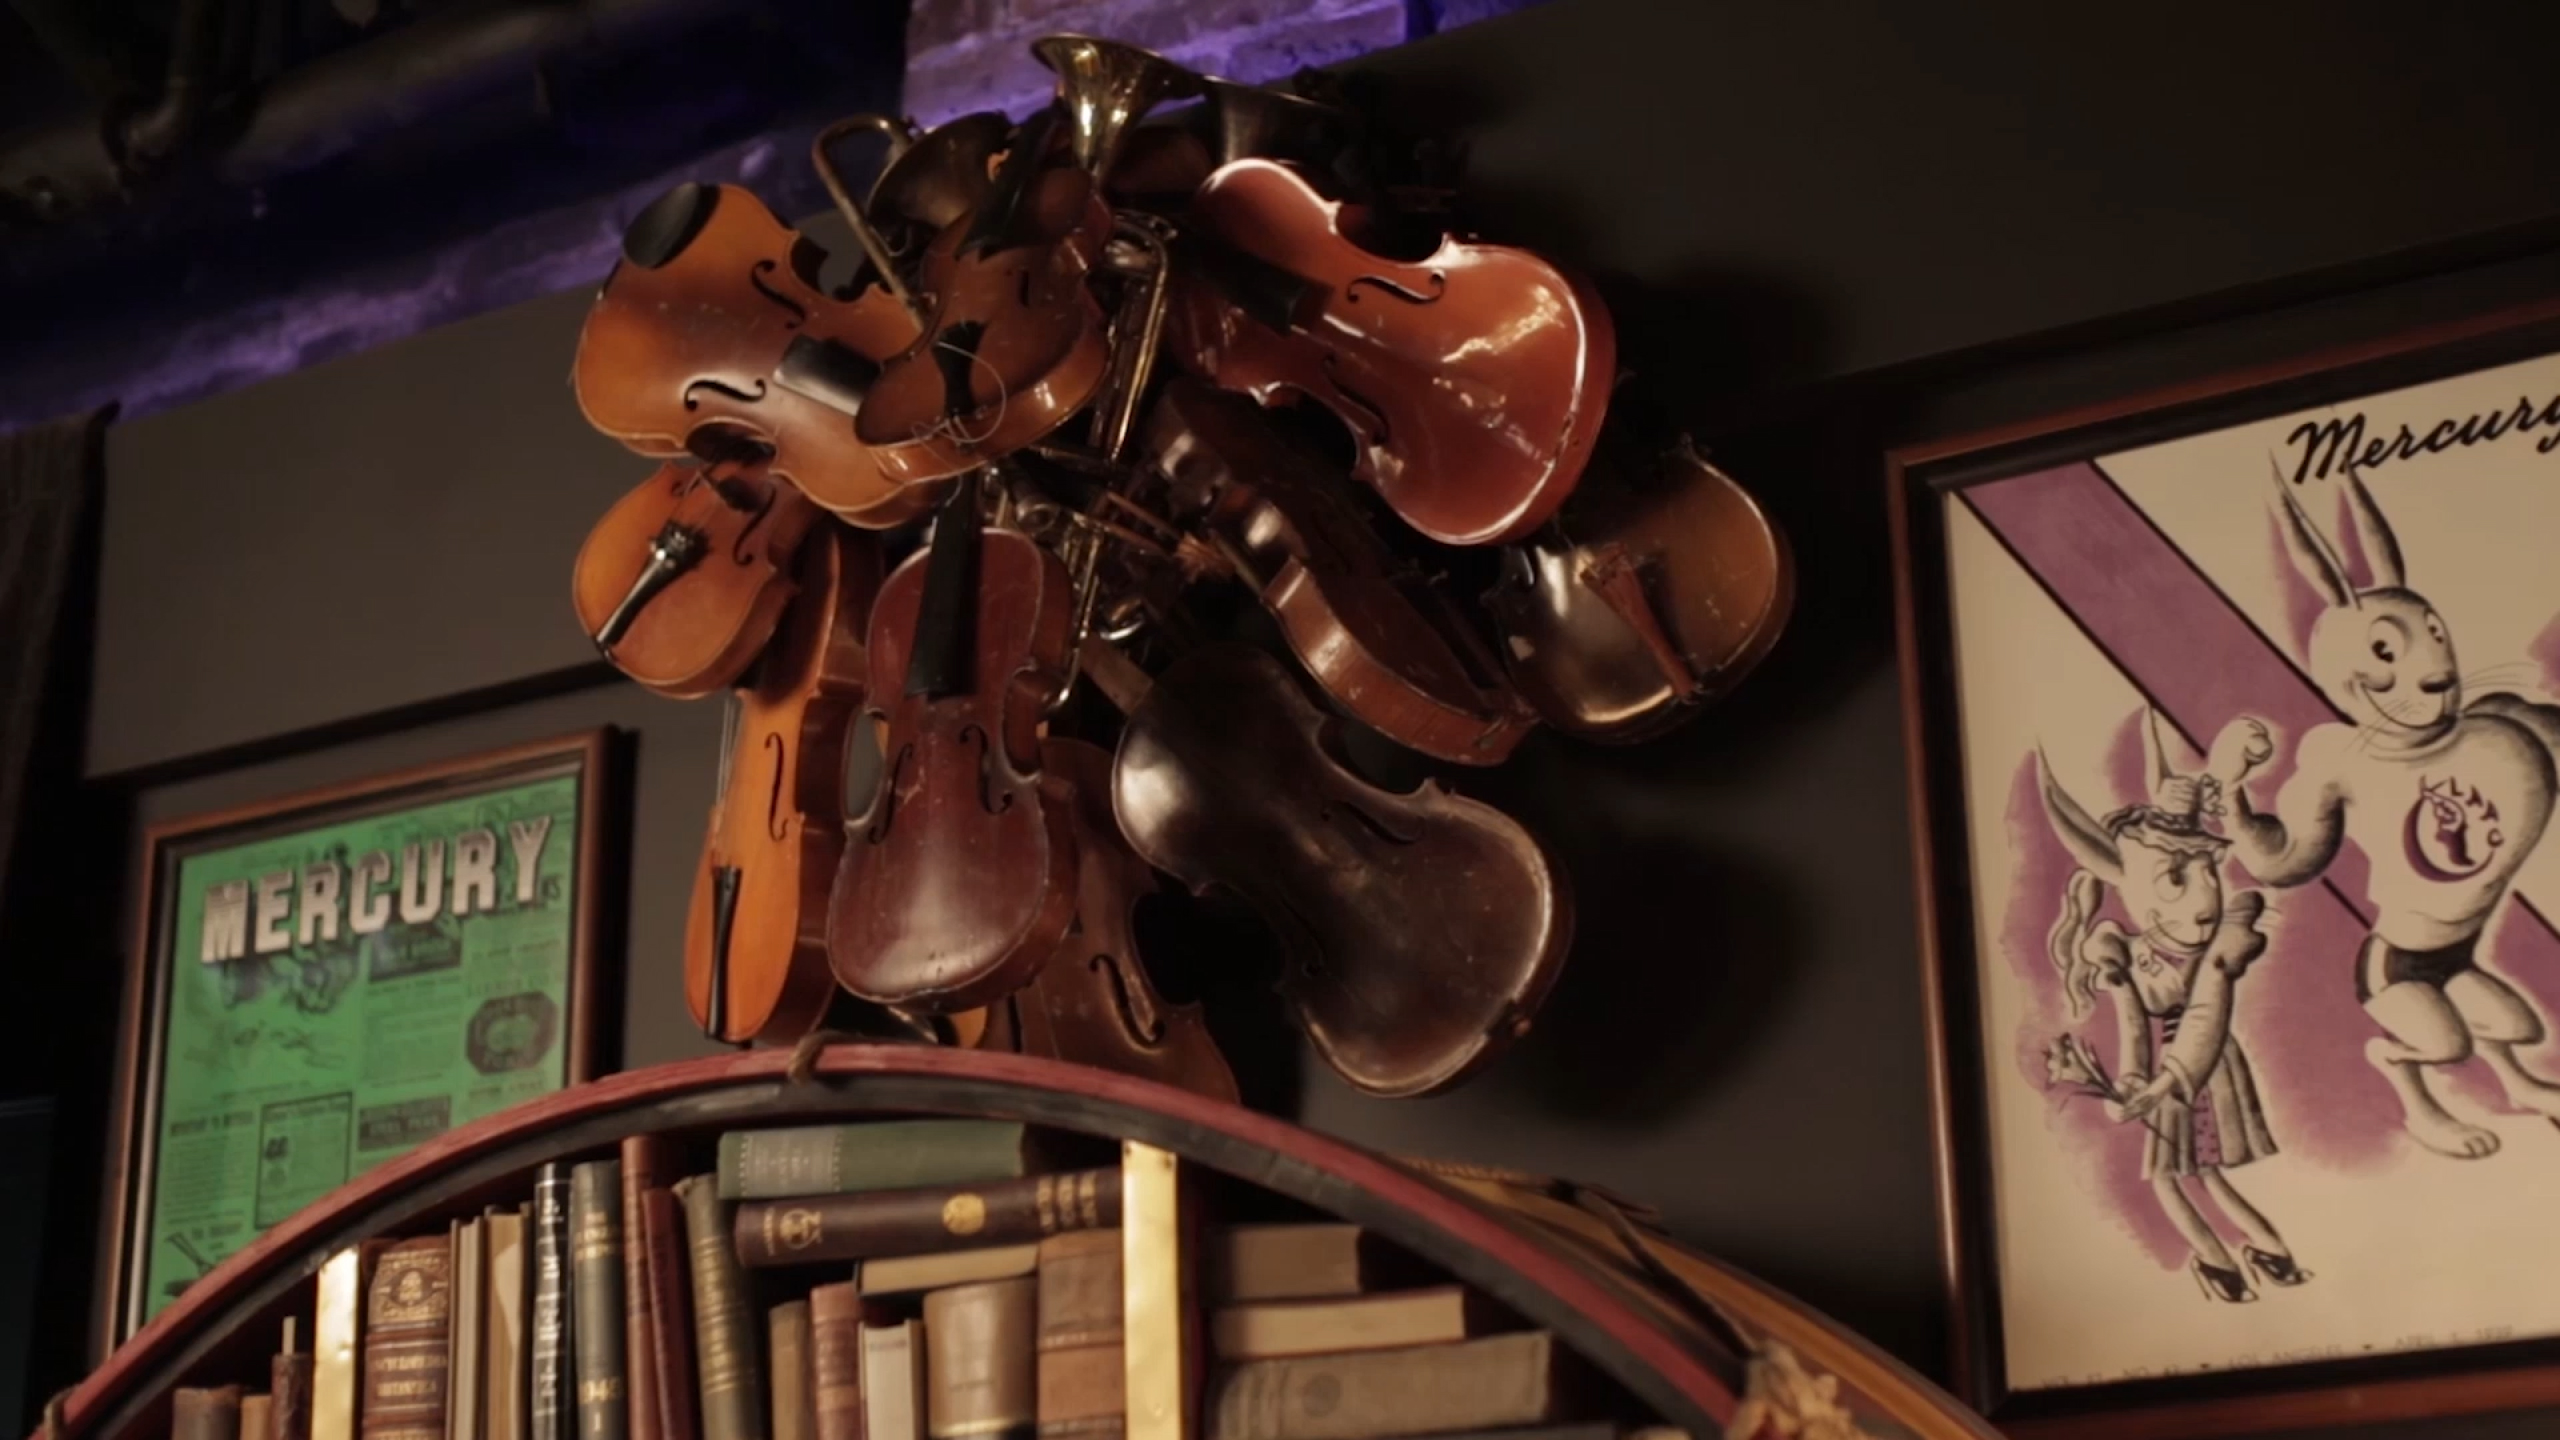 A collection of vintage instruments and books displayed on a wall. A nostalgic blend of music and literature.